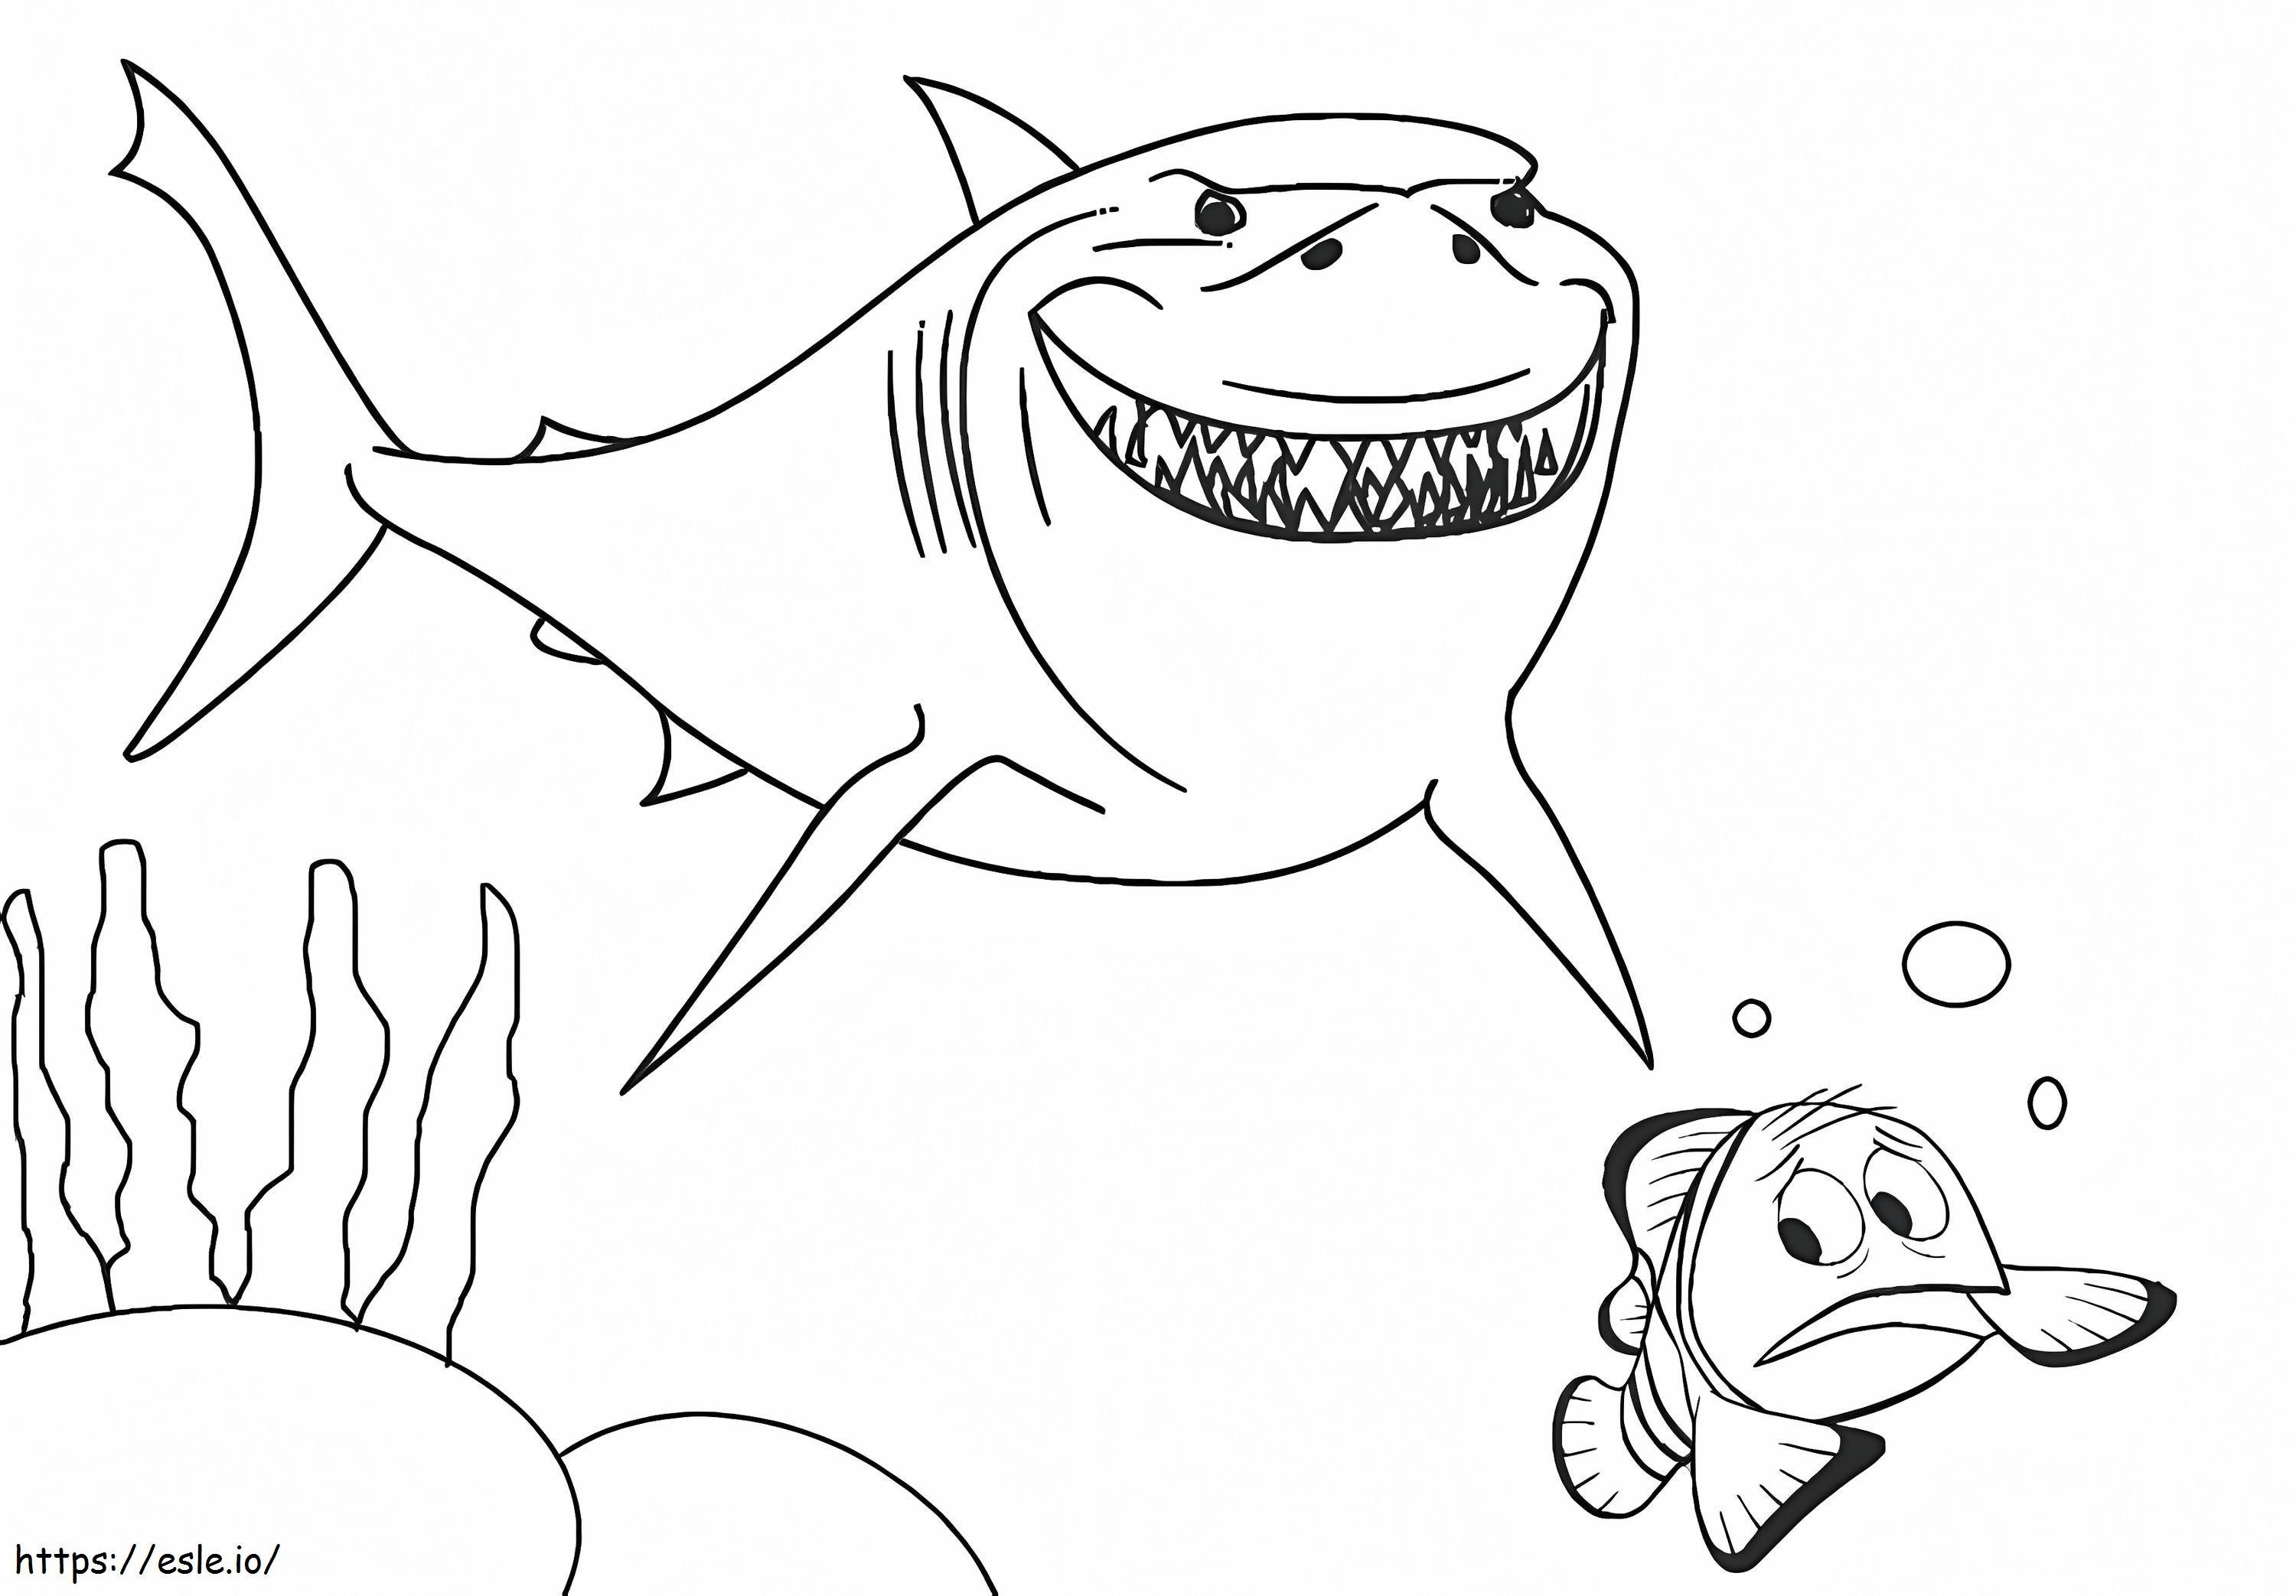 Shark And Nemo coloring page